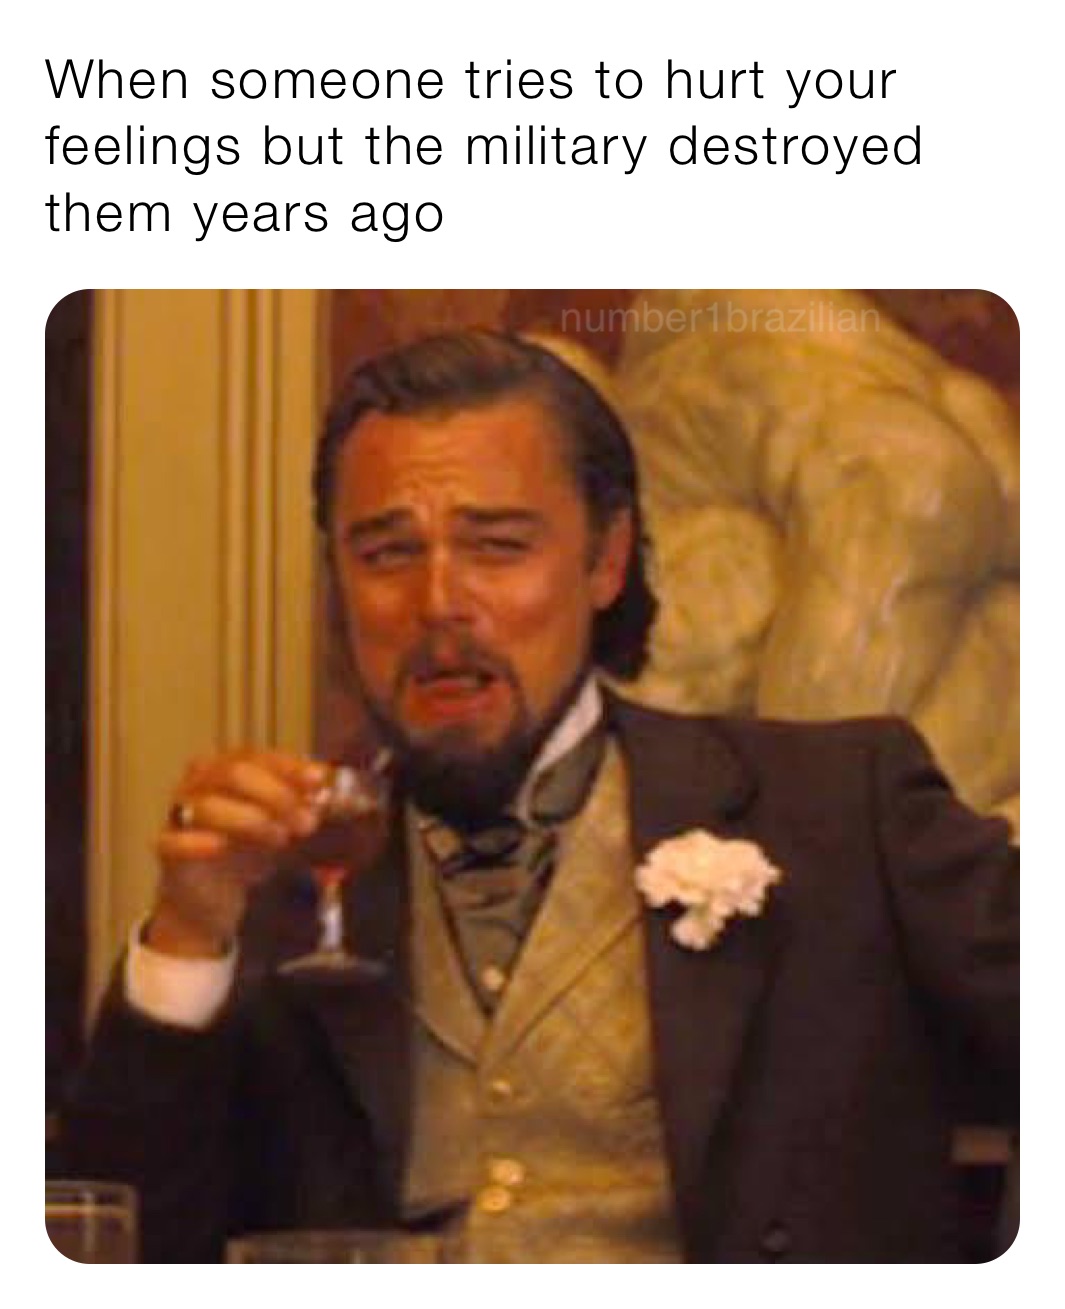 When someone tries to hurt your feelings but the military destroyed them years ago